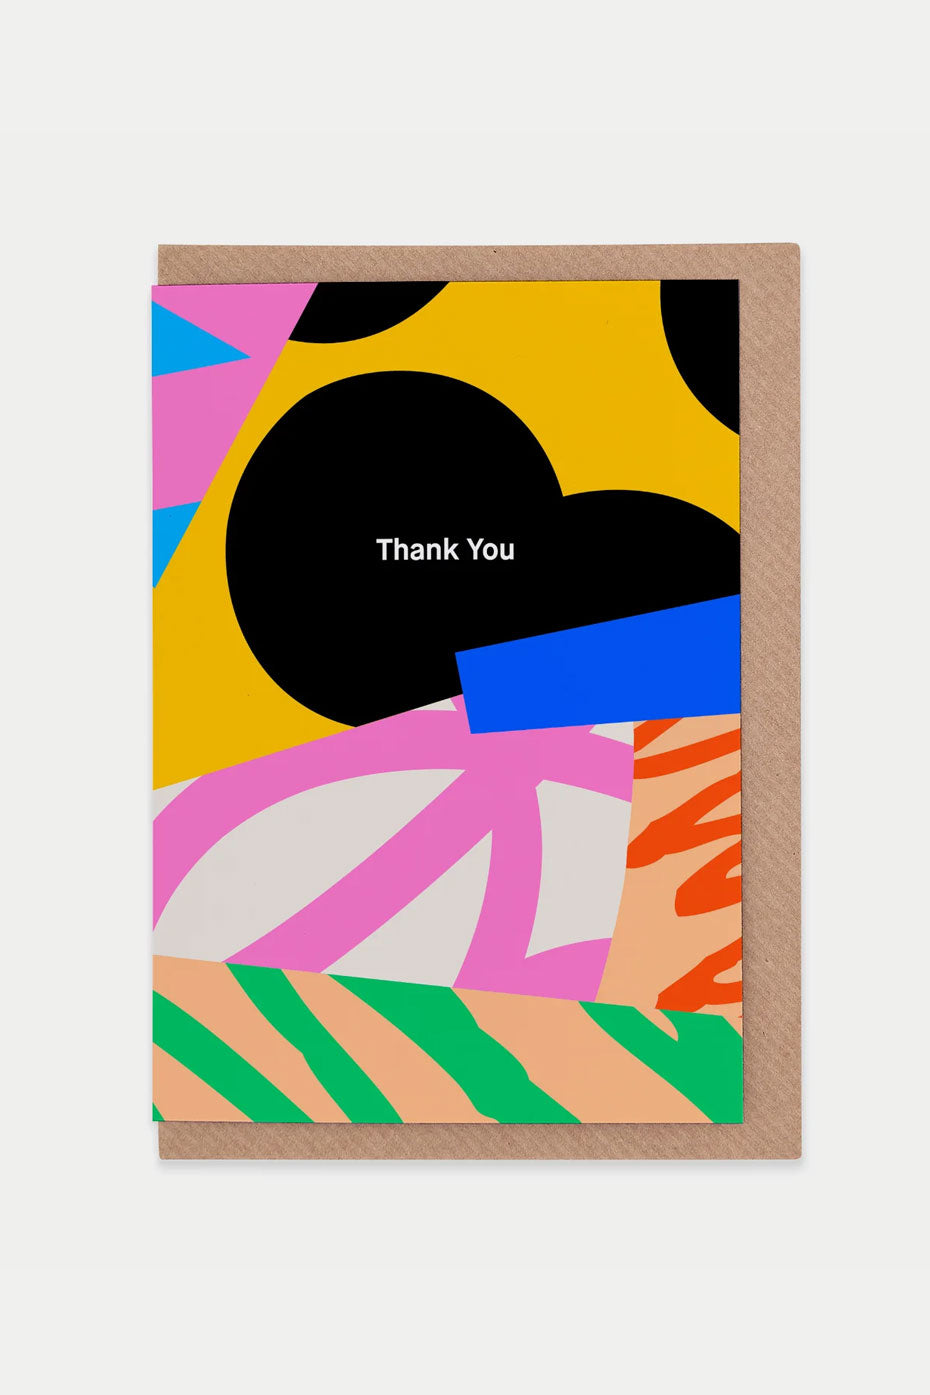 evermade-thank-you-greetings-card